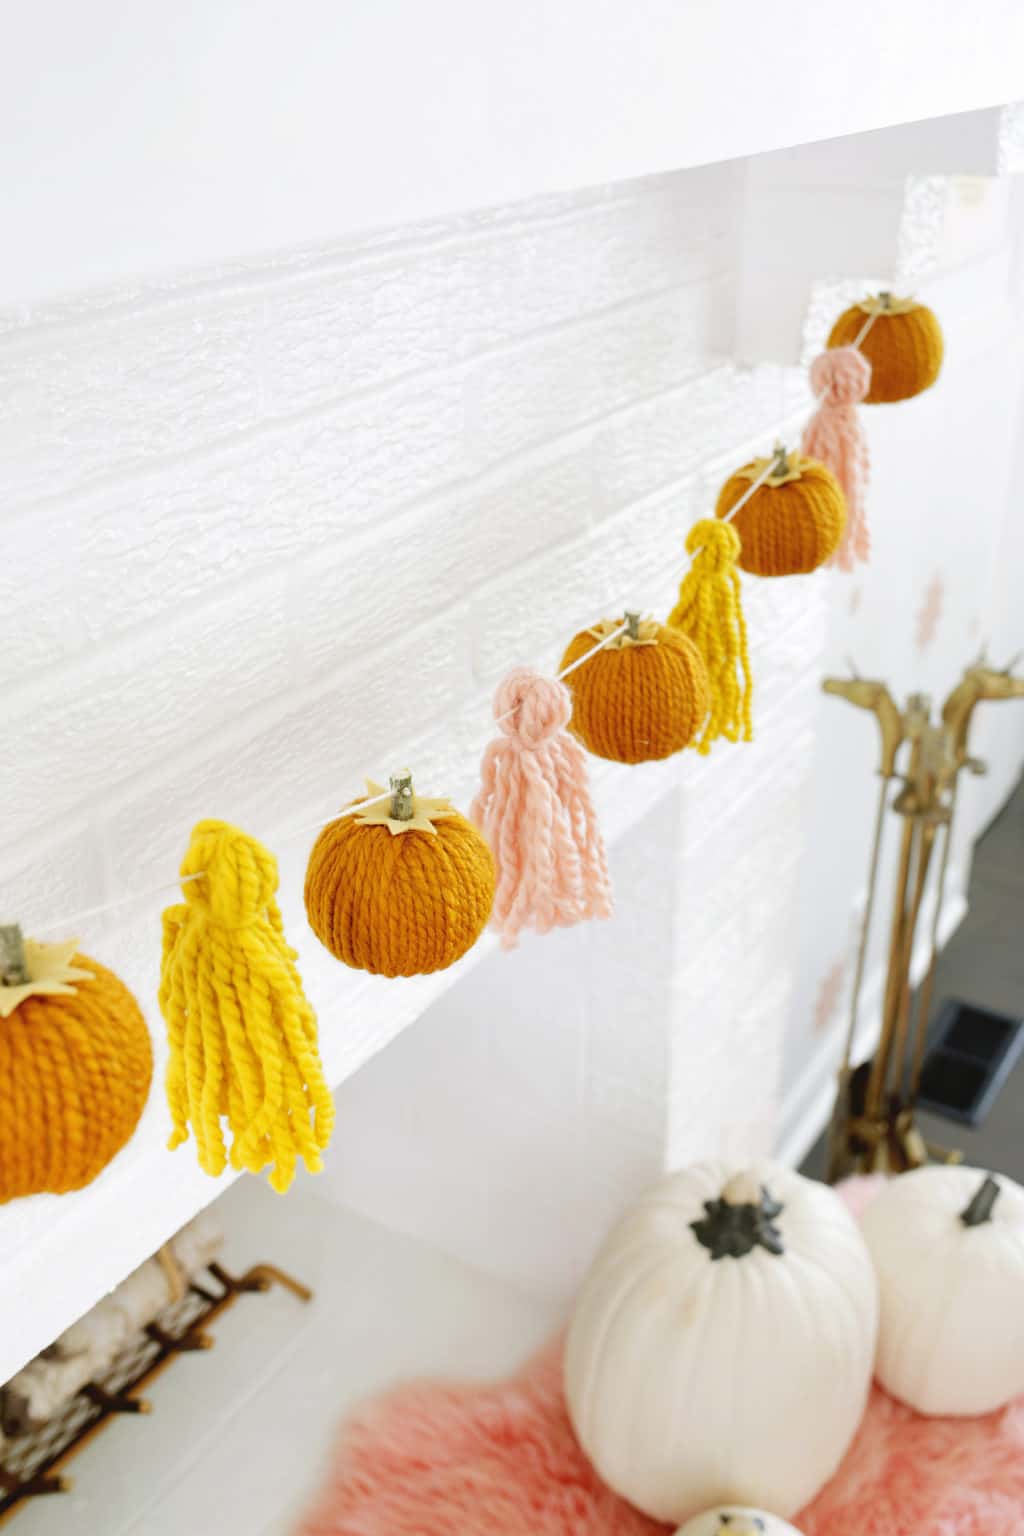 How To Decorate Your Mantel For Fall